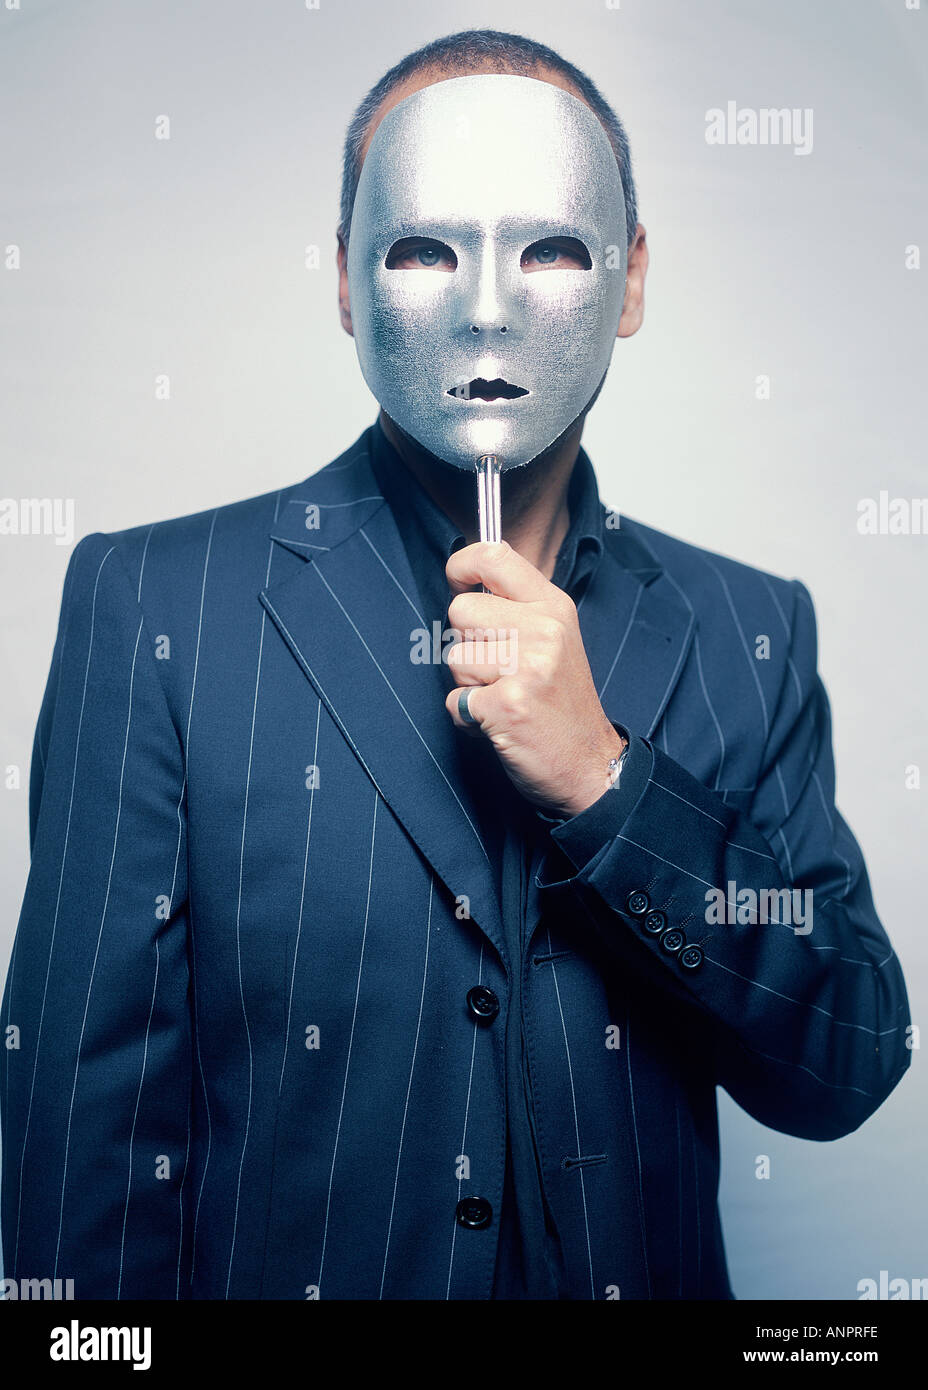 Gangster wearing a mask Stock Photo - Alamy